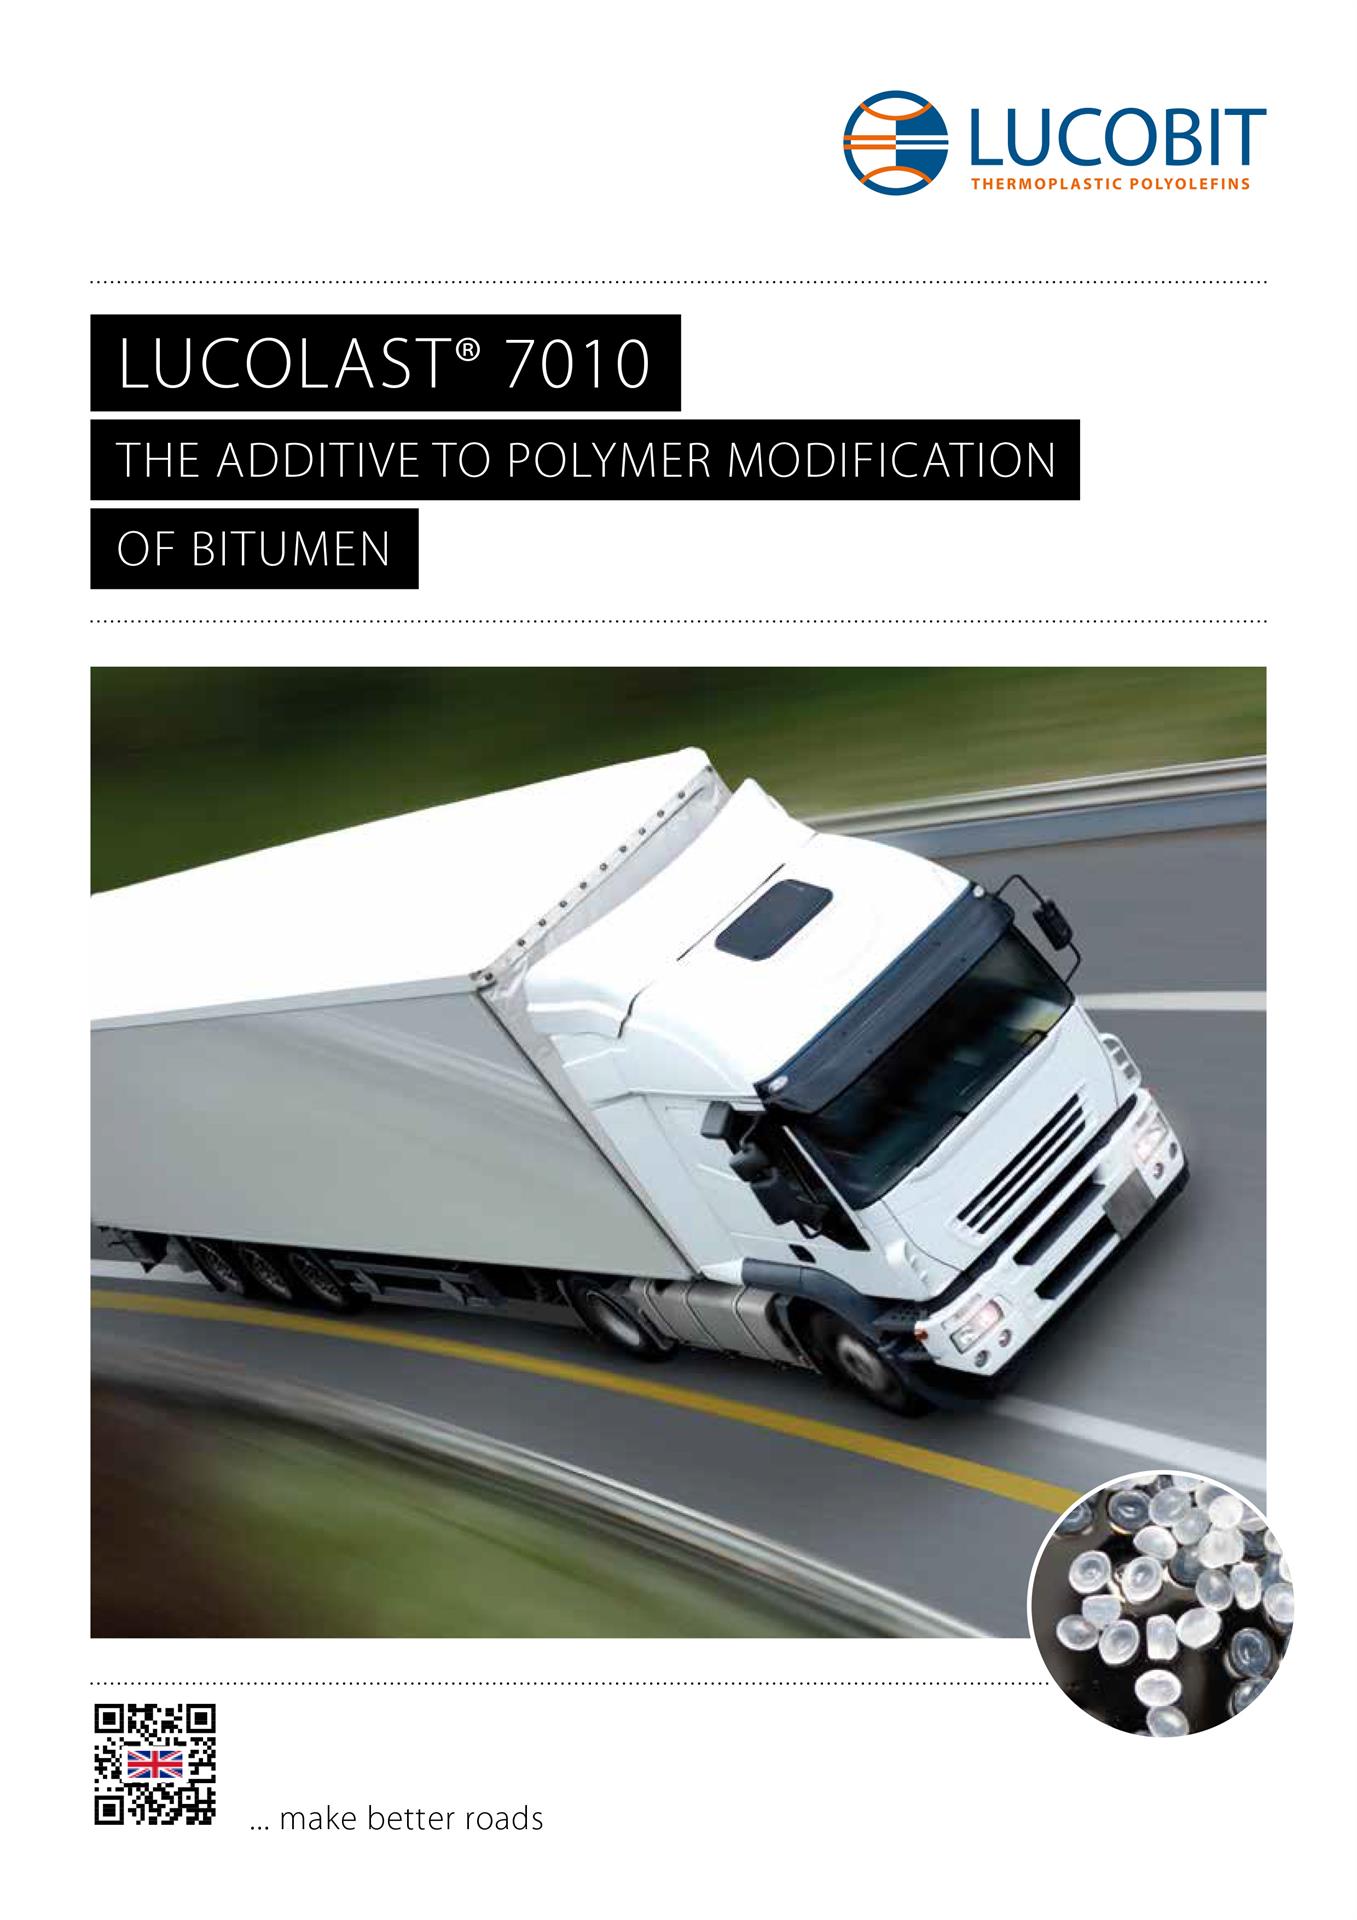 LUCOBIT Brochure - LUCOLAST 7010 THE ADDITIVE TO POLYMER MODIFICATION OF BITUMEN